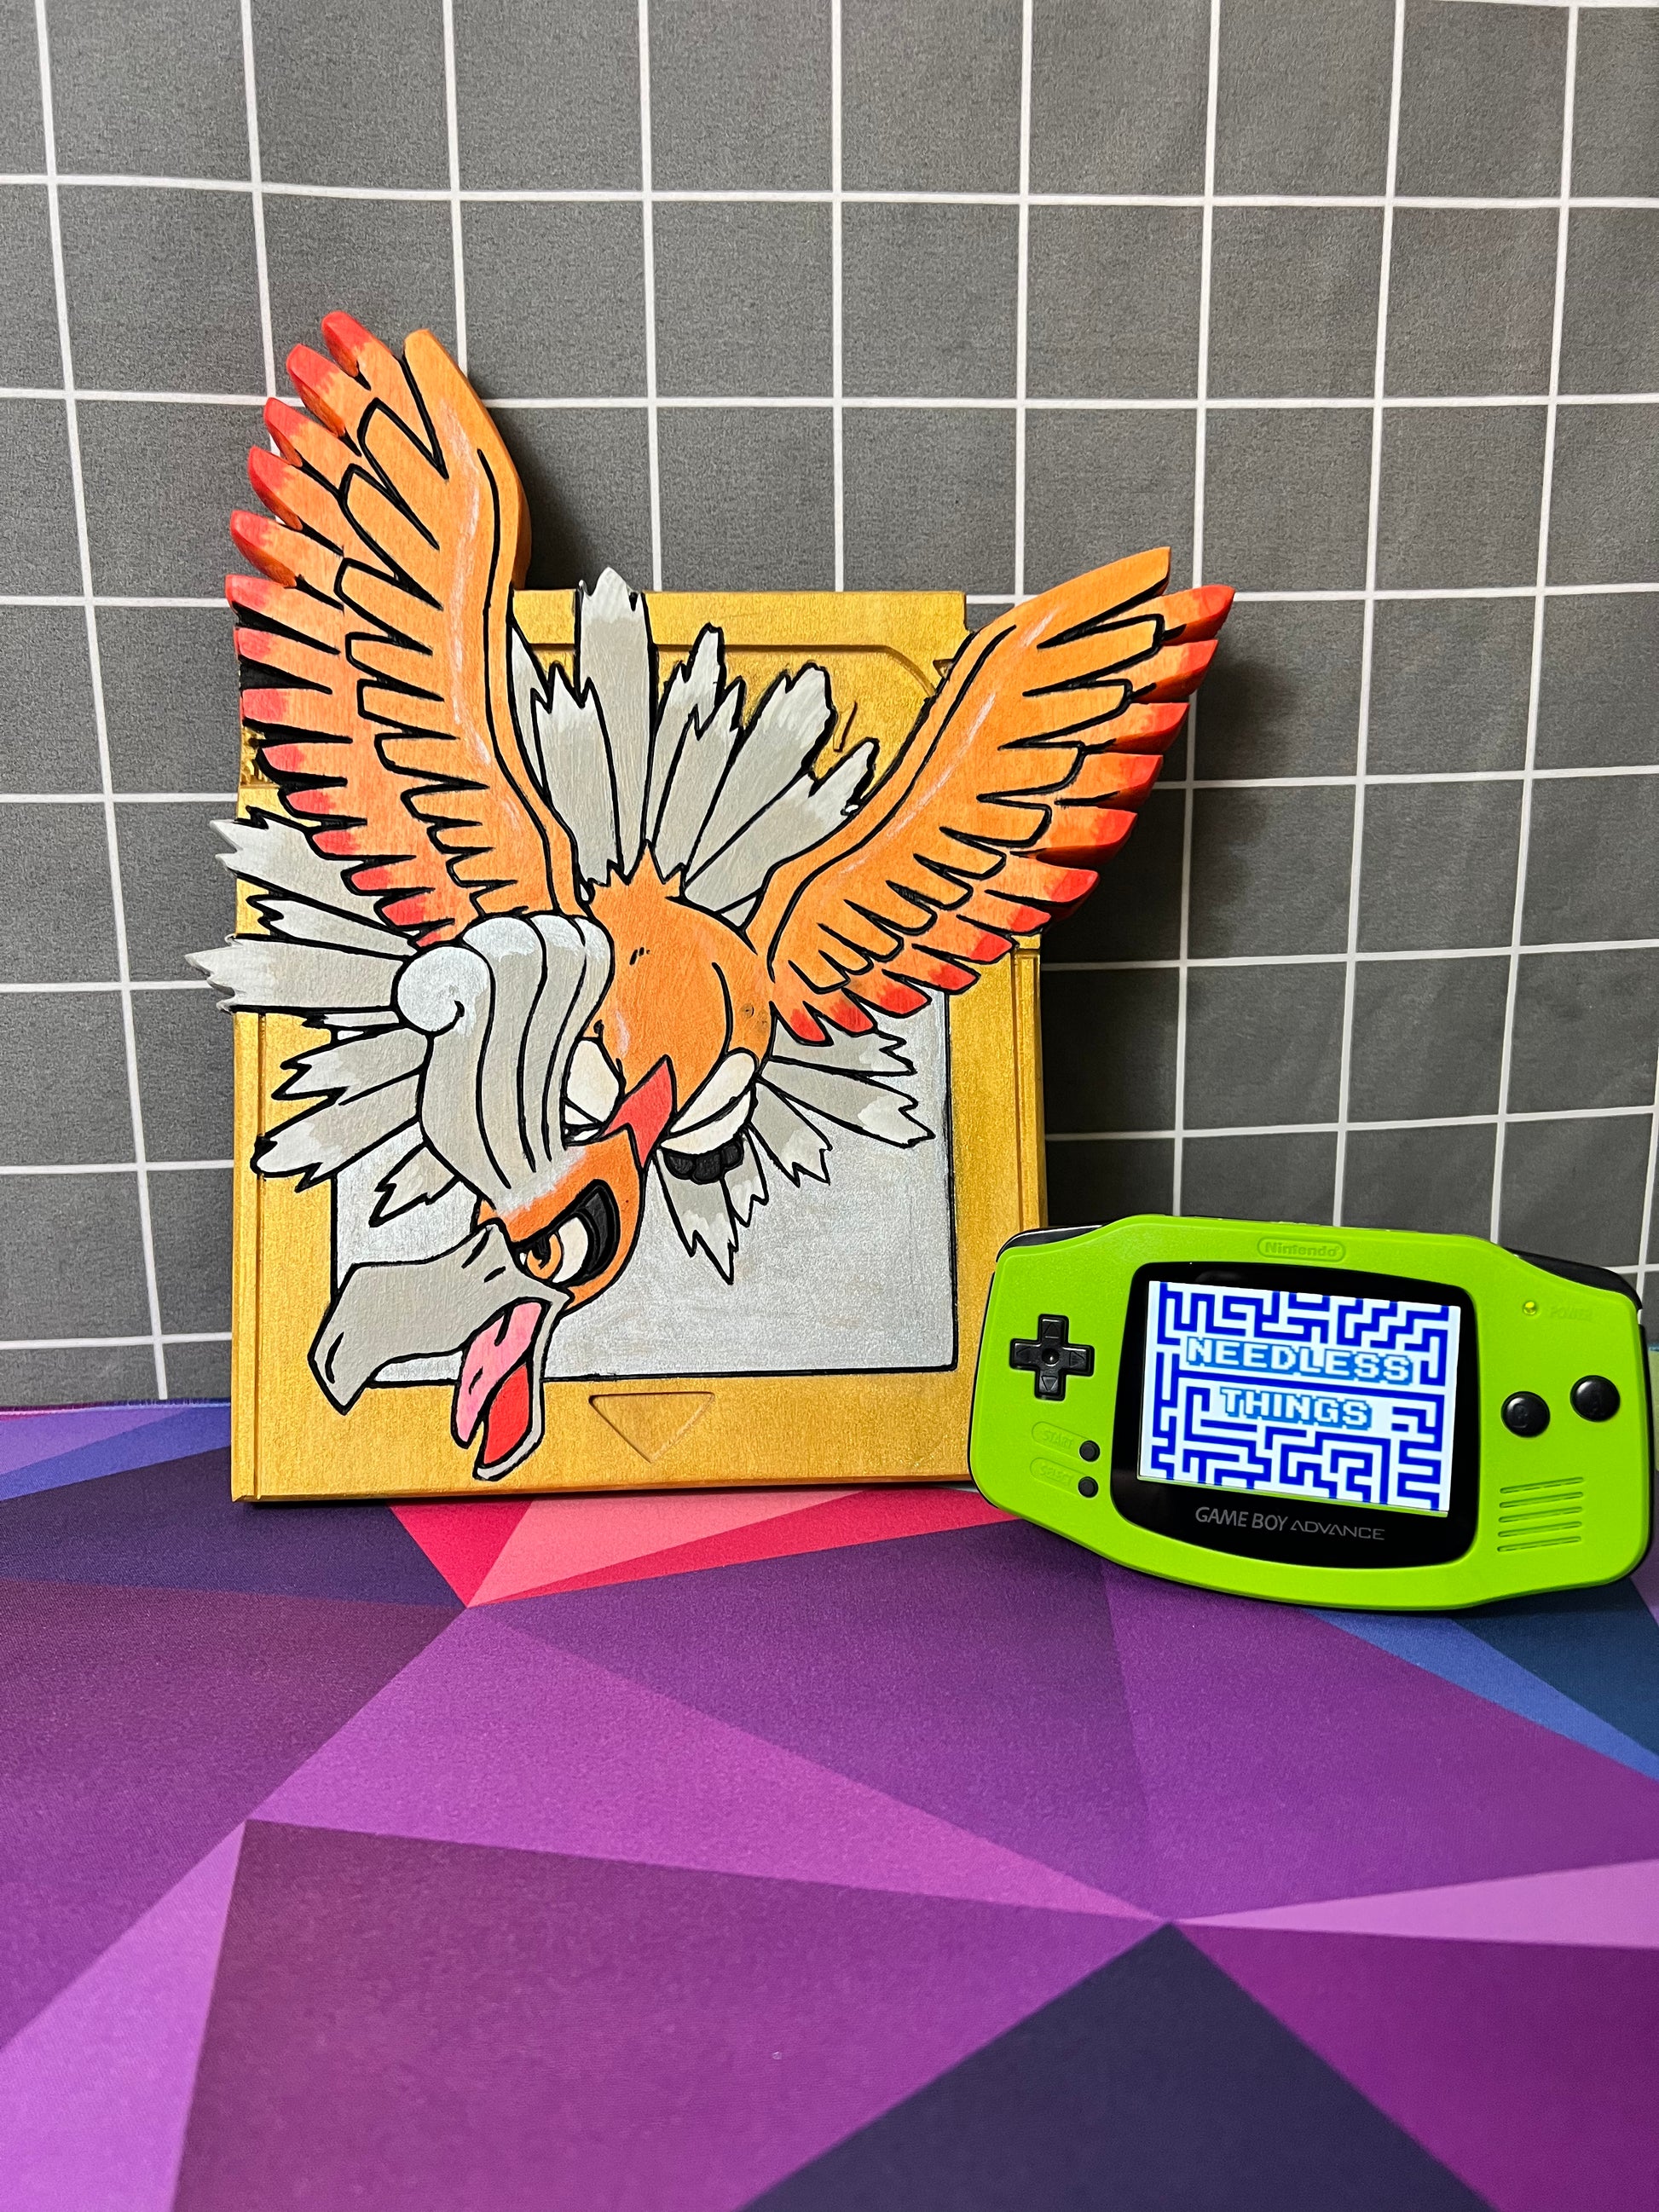 Pokemon Gold Ho-oh Gameboy Color Shell